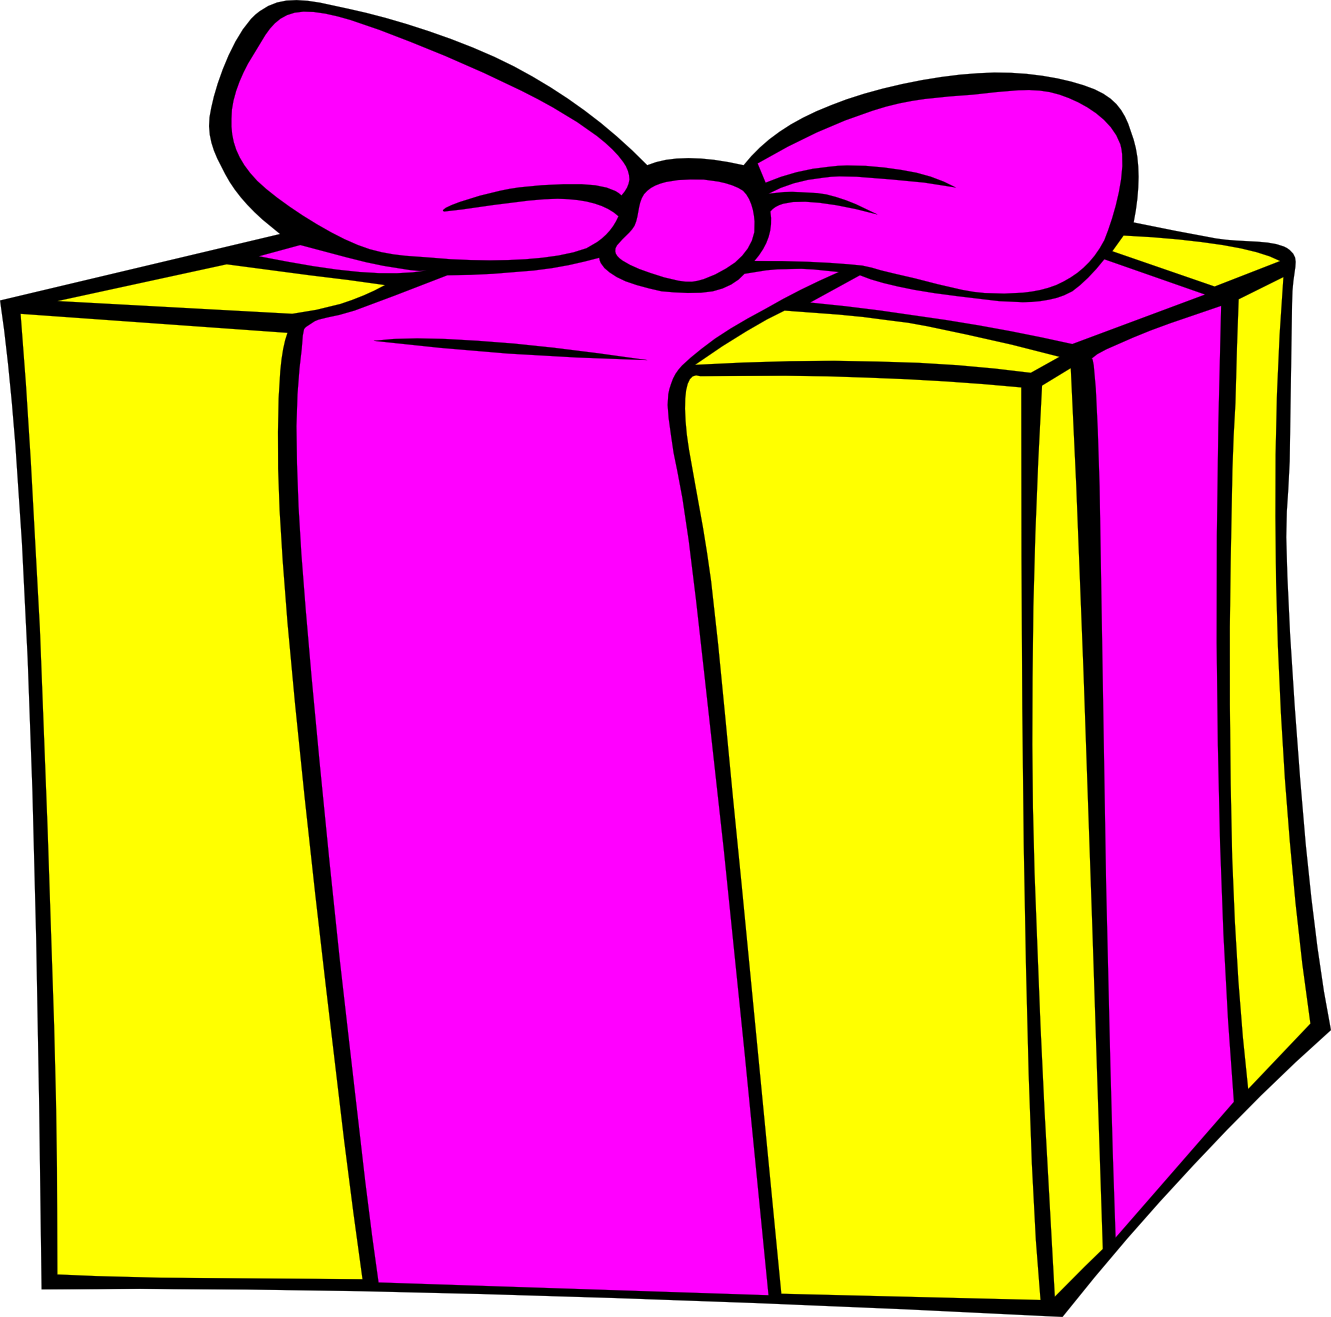 Happy Birthday Present Clipart   Clipart Panda   Free Clipart Images